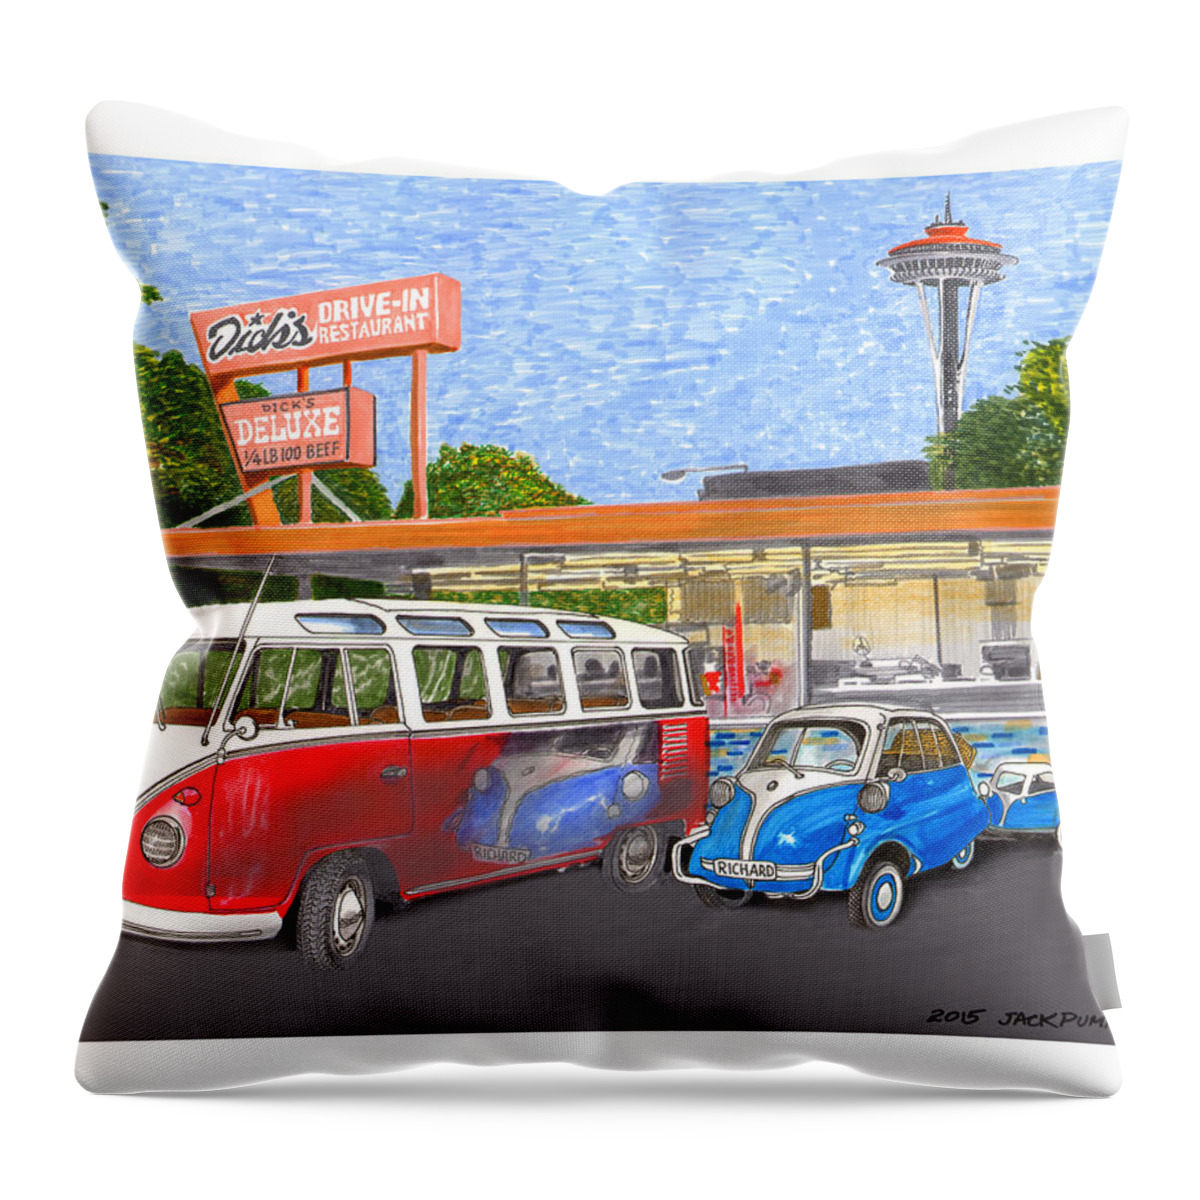 Framed Prints Of Dick's Drive-in Best Hamburgers In Seattle Throw Pillow featuring the painting Dicks Drive In Seattle by Jack Pumphrey